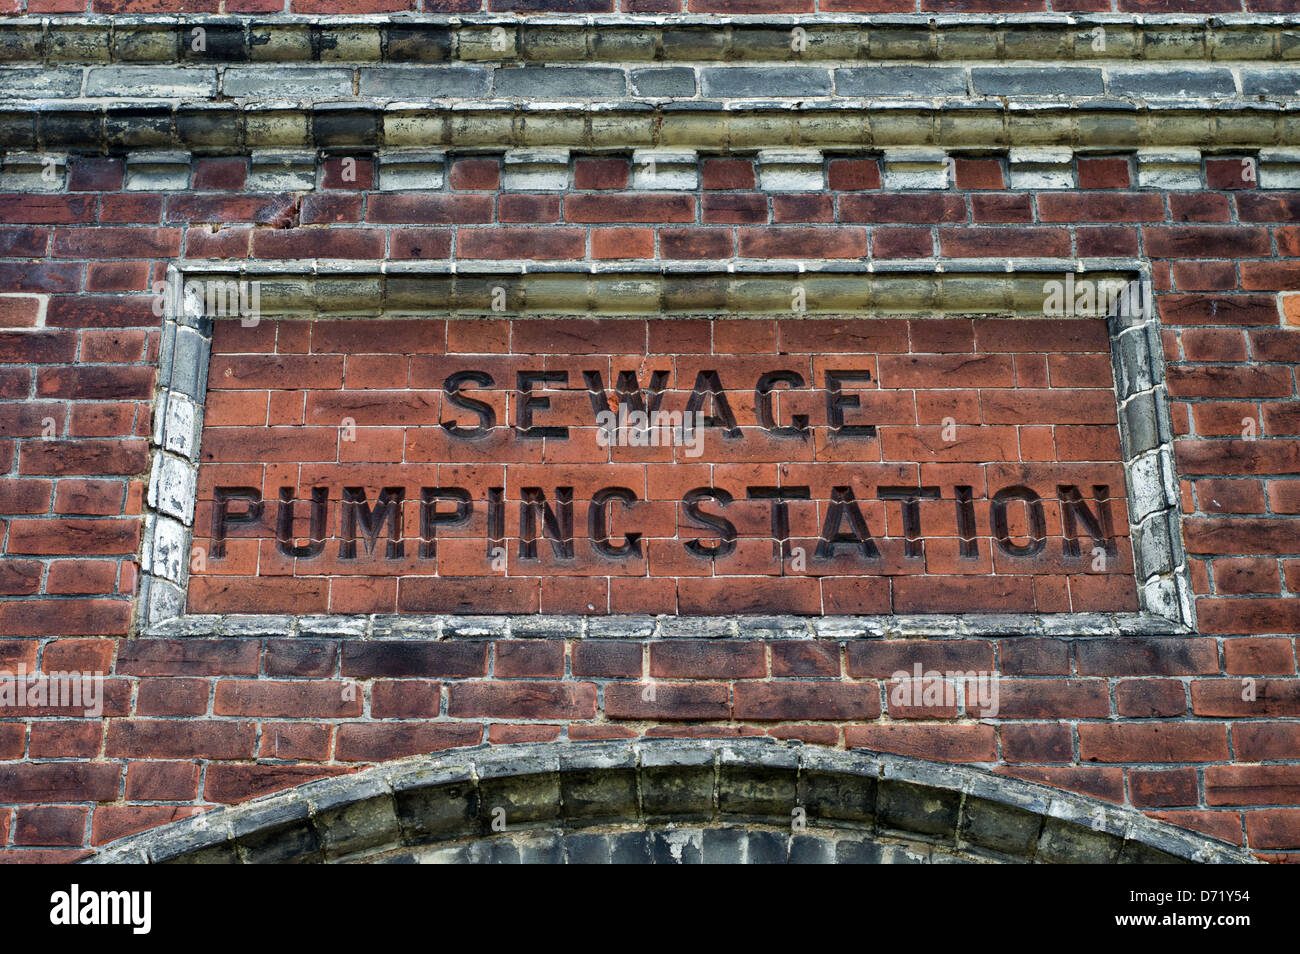 The words Sewage Pumping Station chiseled into brickworks of an old public utility building. Stock Photo